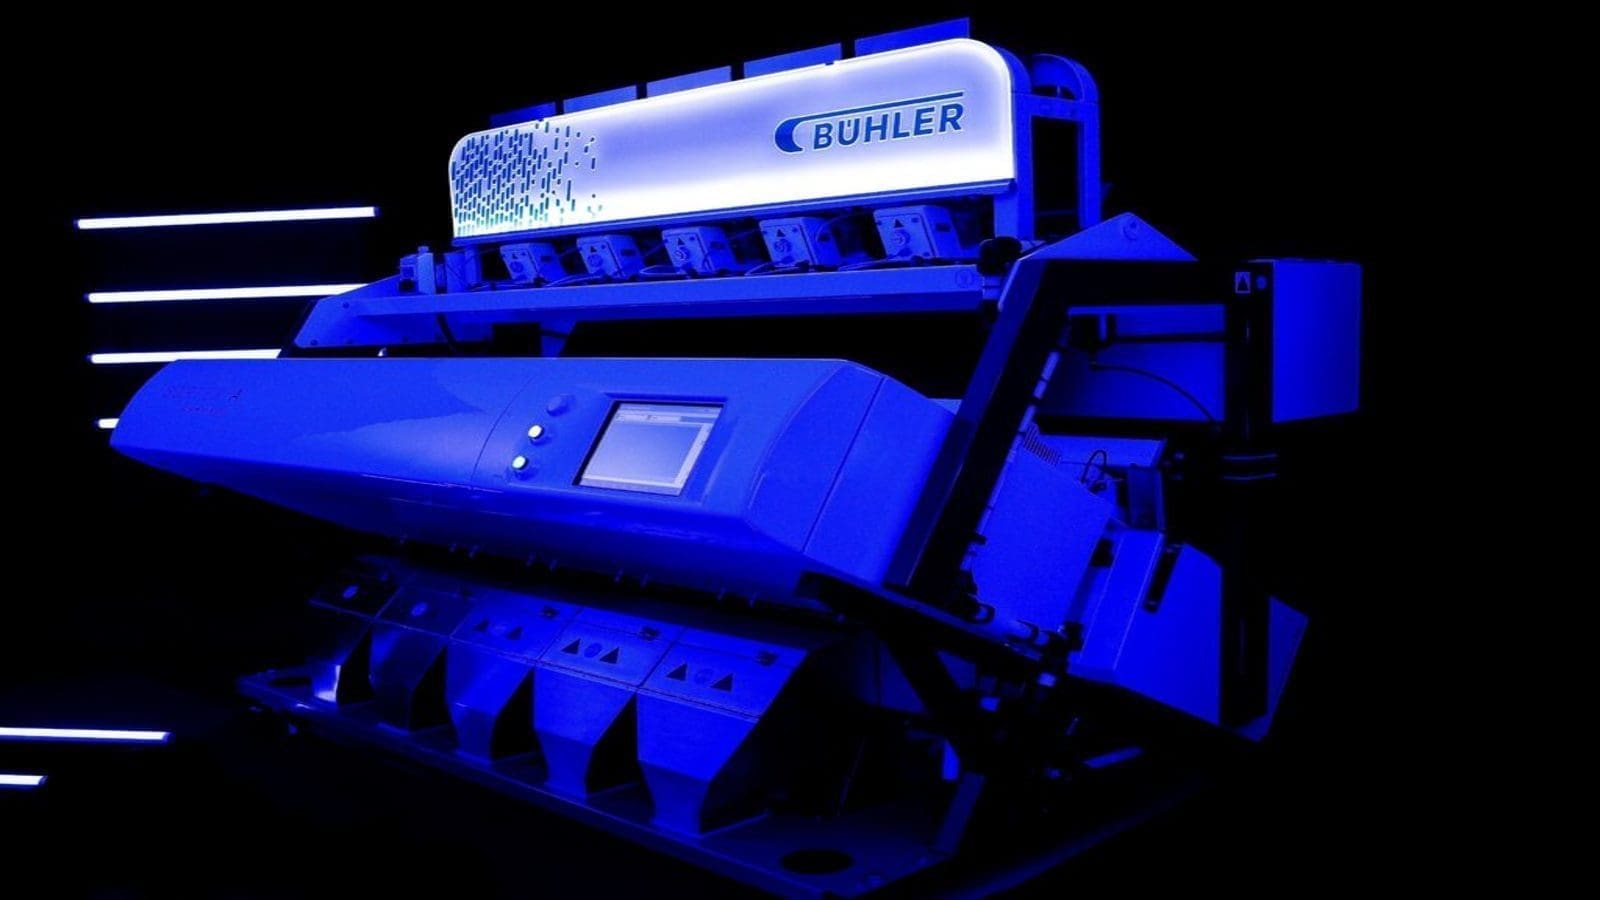 Bühler launches latest optical sorter that cuts energy, water use by 50%